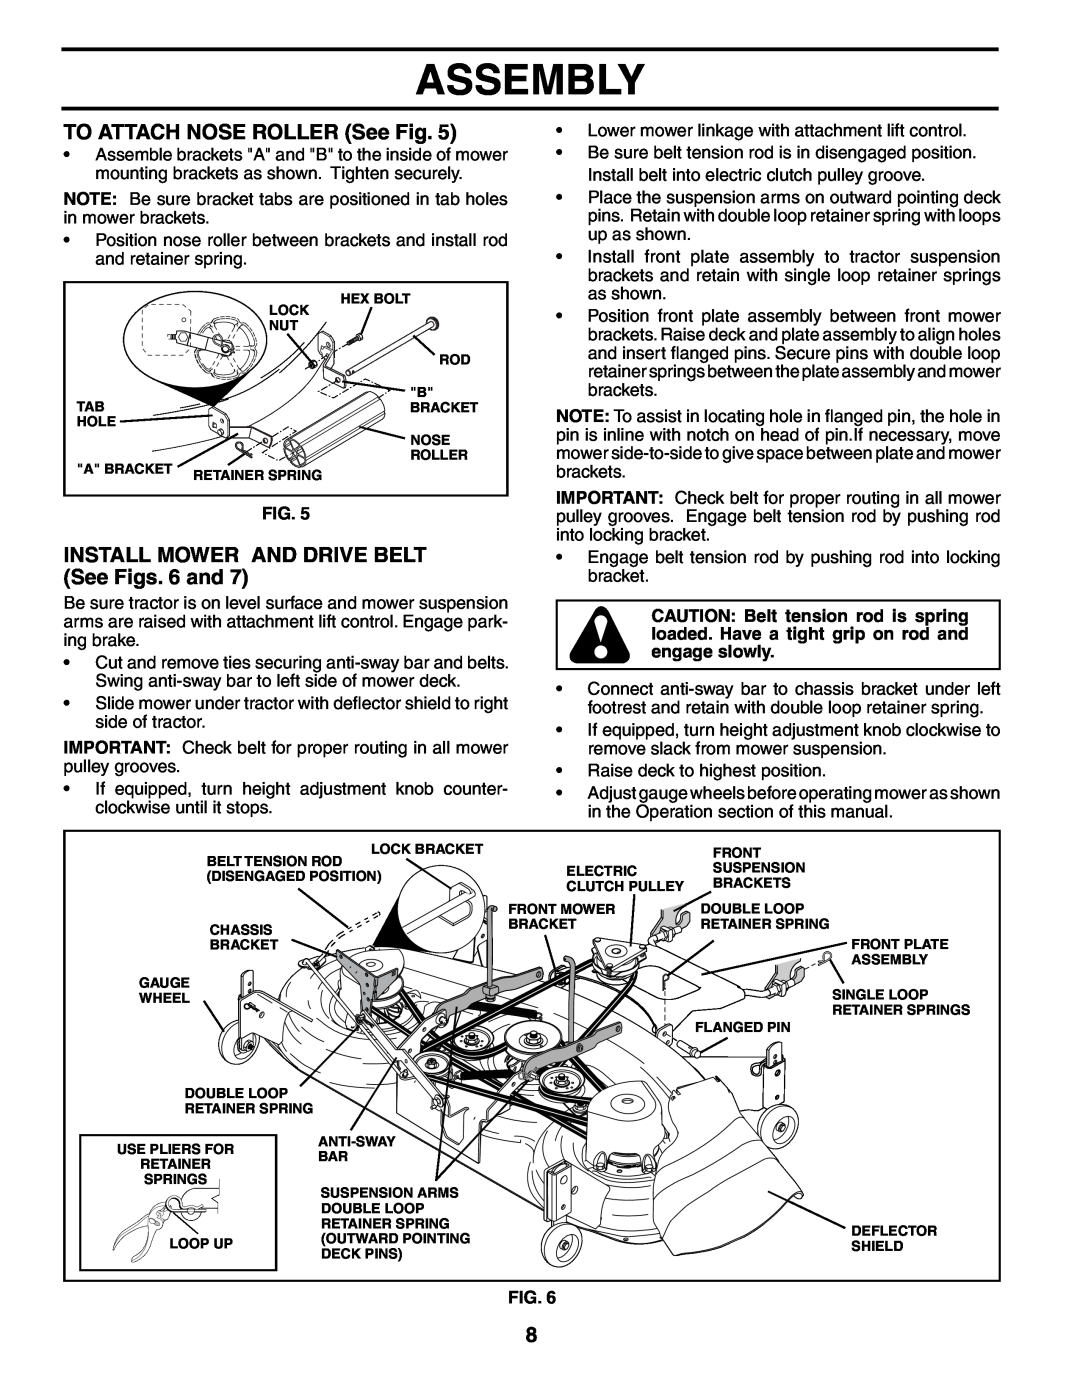 Poulan PDGT26H48B owner manual TO ATTACH NOSE ROLLER See Fig, INSTALL MOWER AND DRIVE BELT See Figs. 6 and, Assembly 